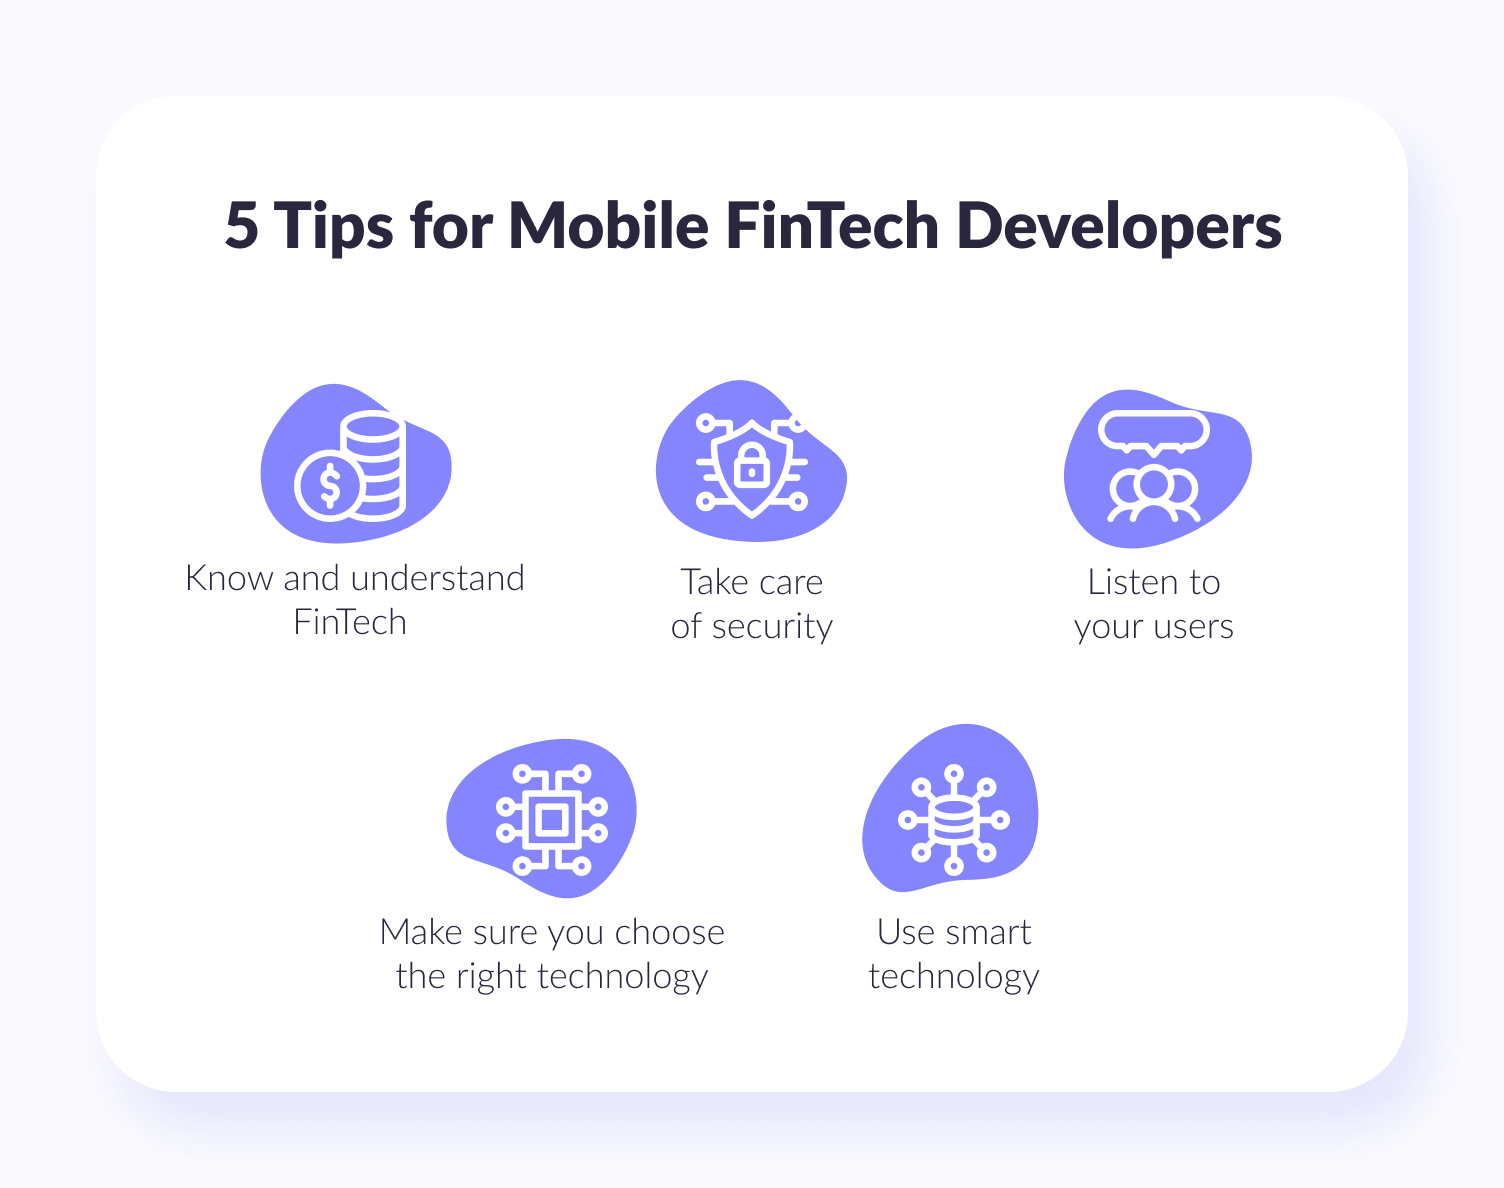 Five tips for mobile FinTech developers